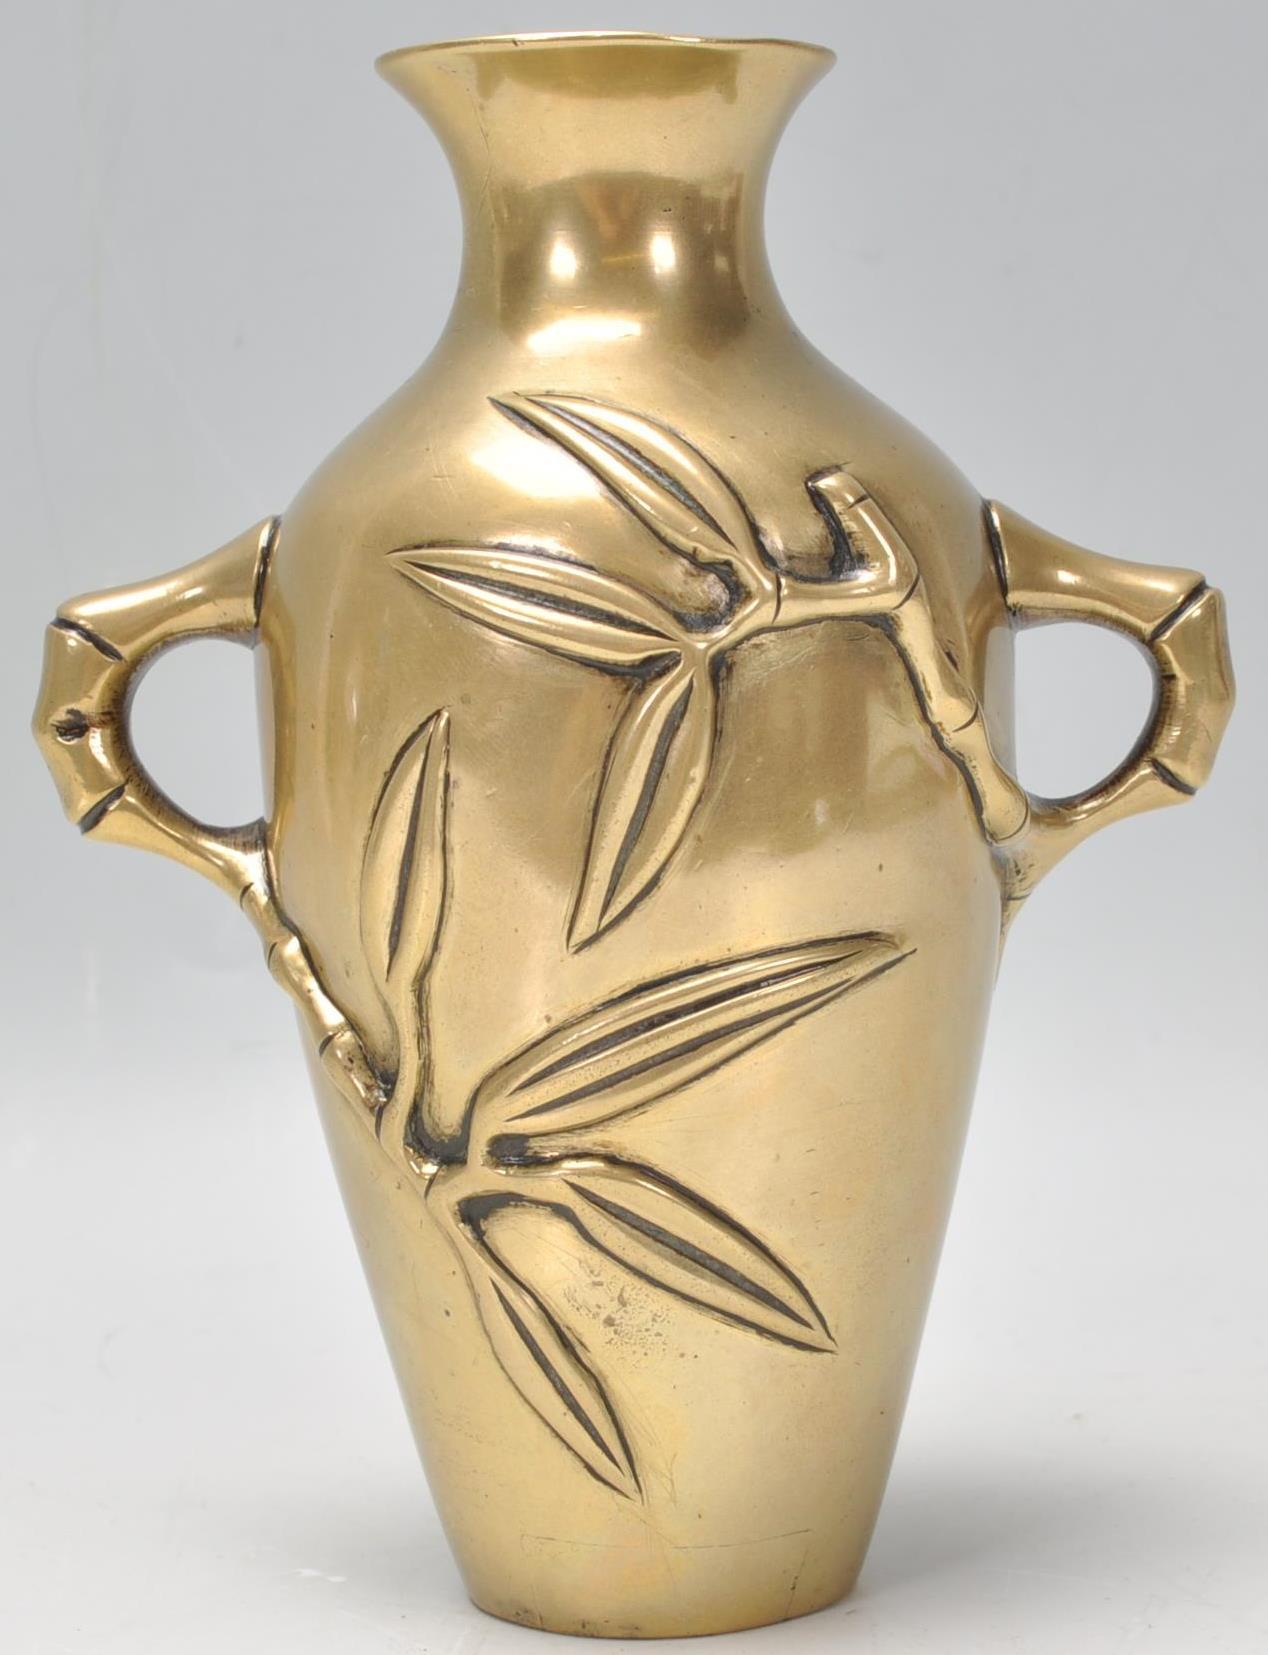 A believed 19th century Chinese brass / bronze twin handled vase having cast and embellished